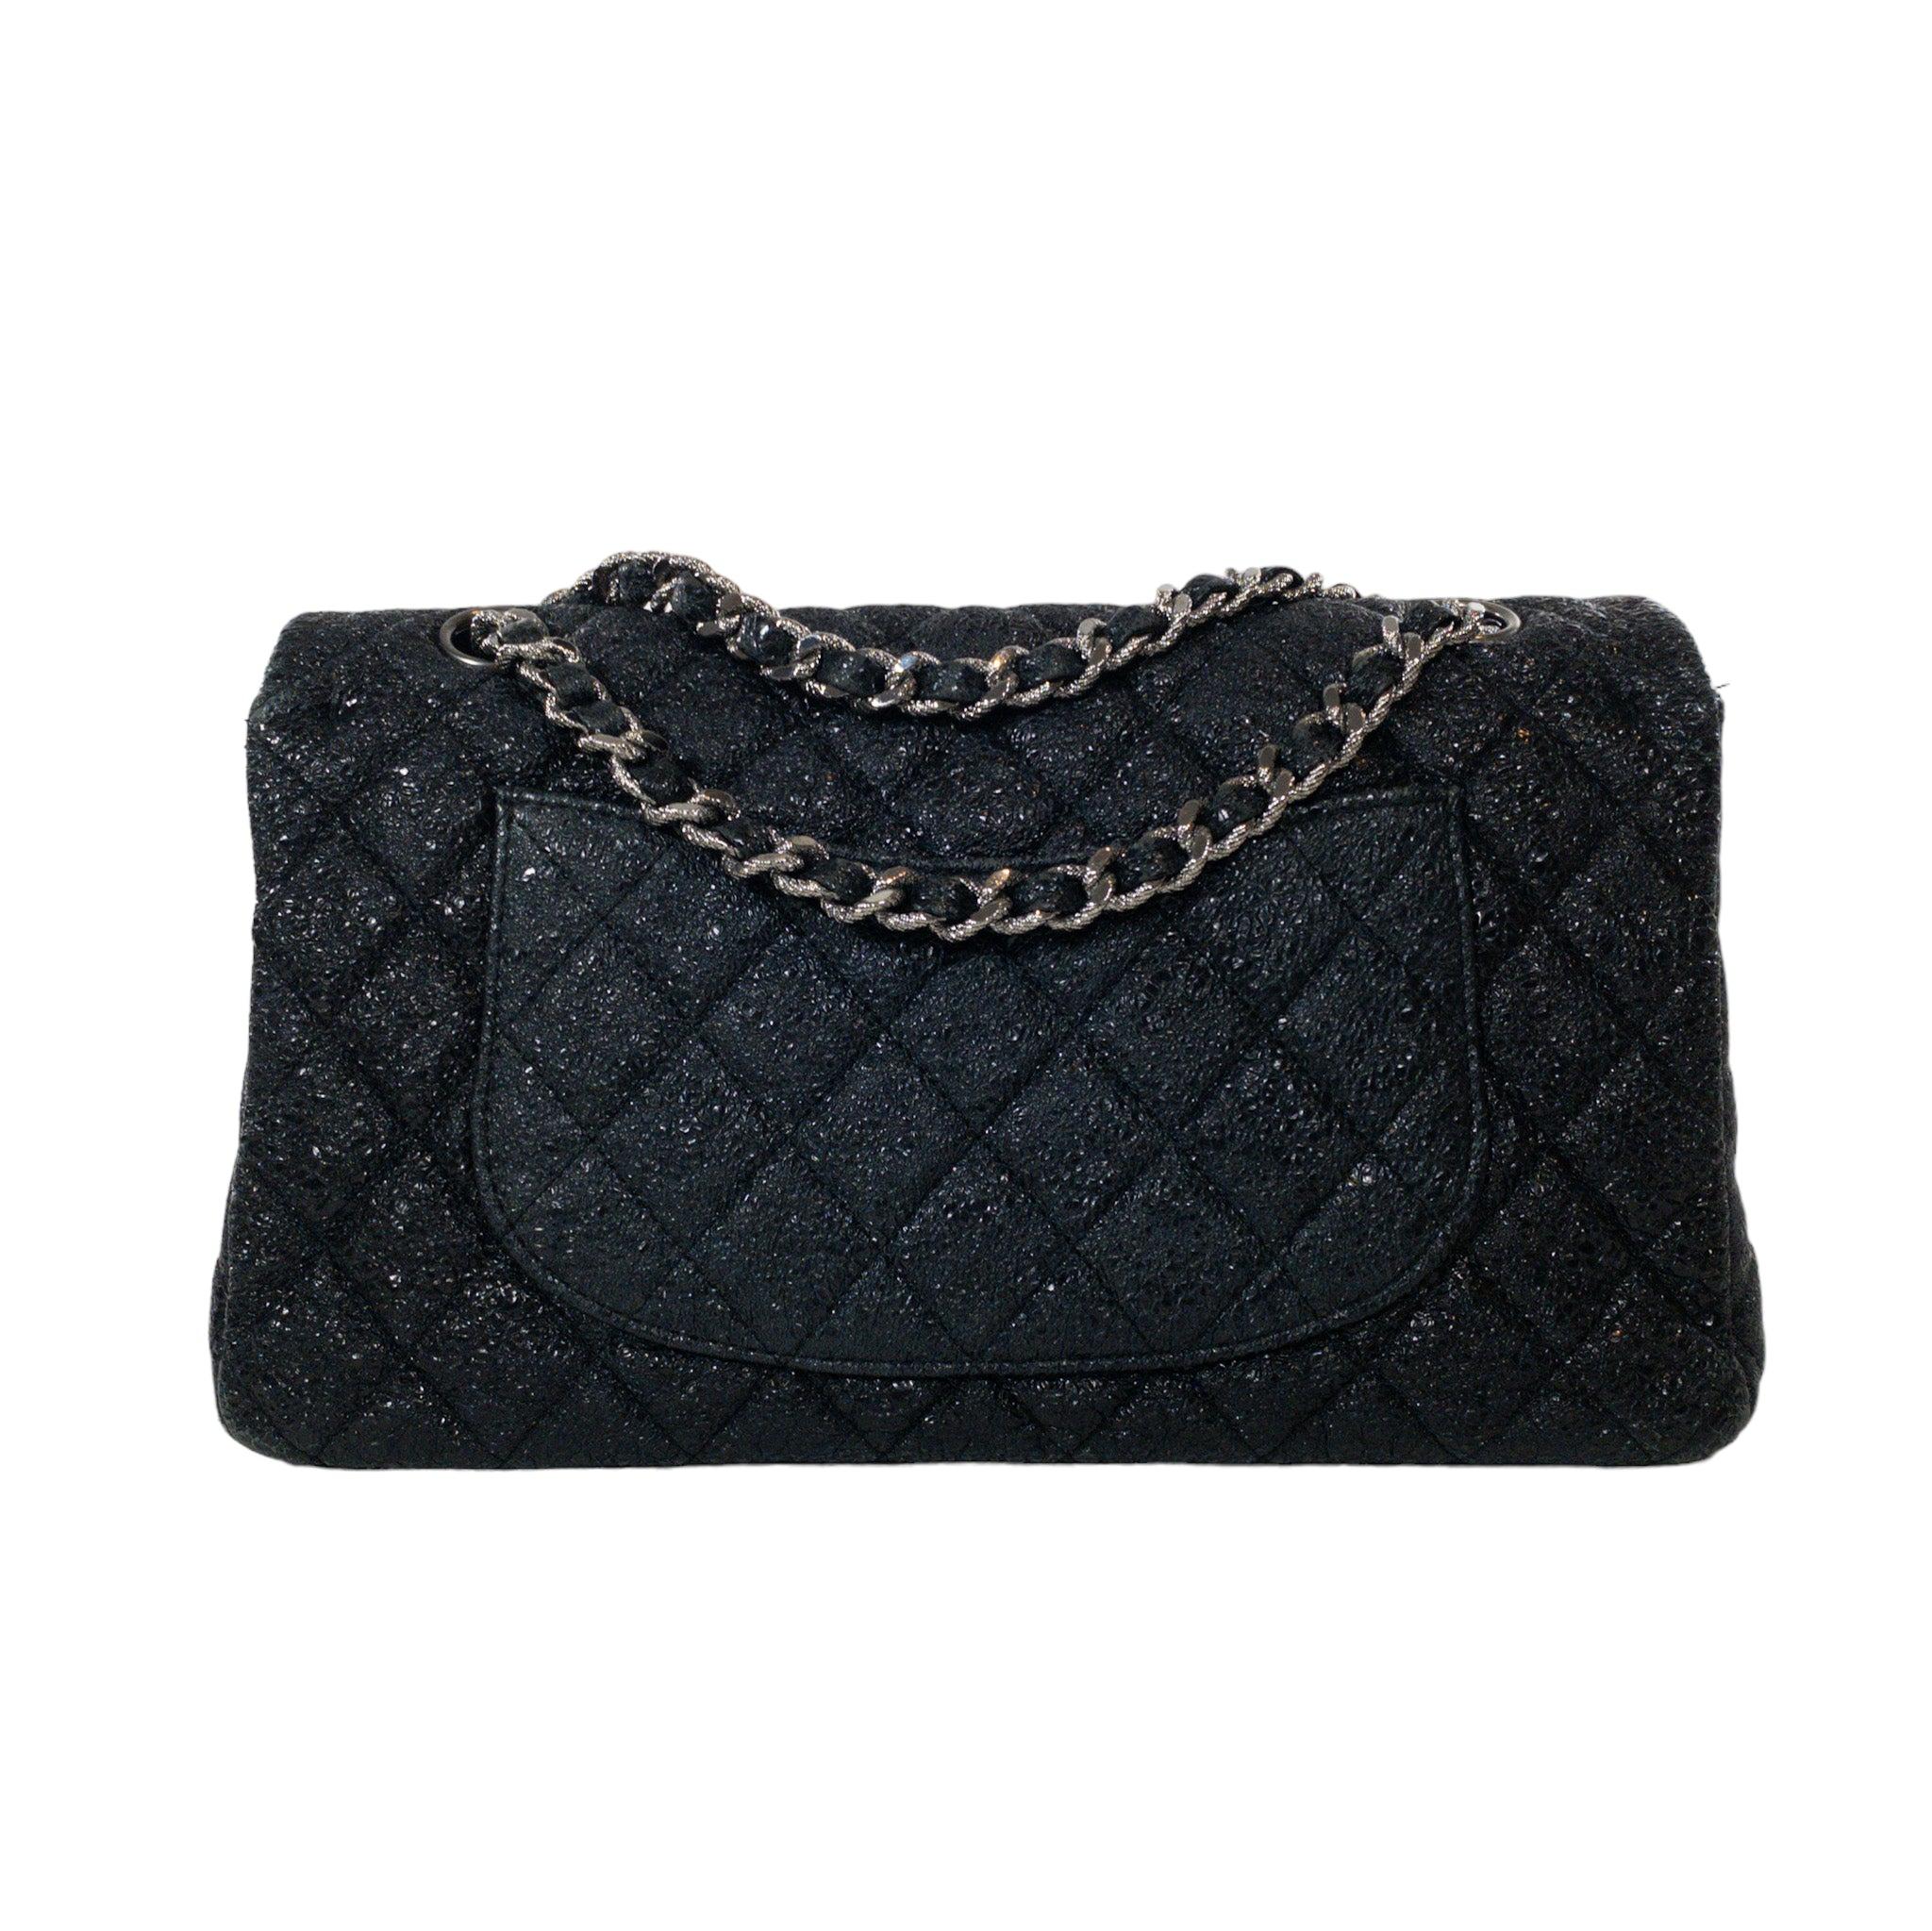 Chanel Black Limited Edition Medium Classic Flap SHW Bag

This is an authentic Chanel Medium Classic Flap. The bag has a flap closure with a Double C logo turn lock. Limited edition piece from A/W 2007 collection in textured metallic black leather